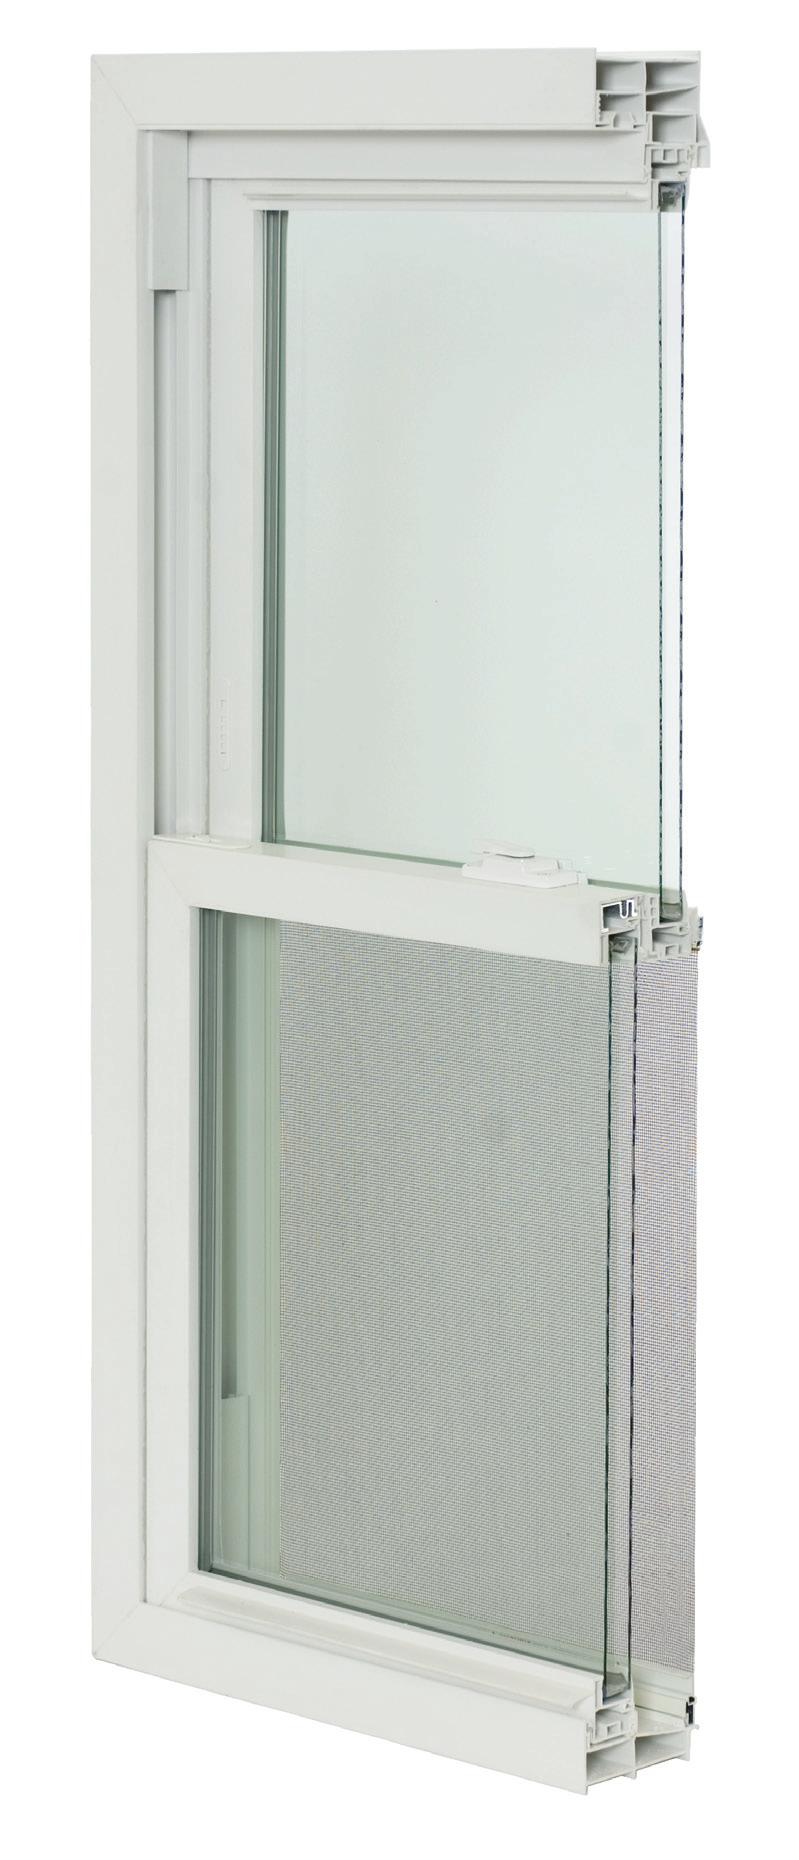 Energy Savings n Dual-Glazed Insulating Glass with Warm-Edge Technology enhances thermal performance n Dual Weather-Stripping virtually eliminates air and water infiltration n Interlocking Sashes